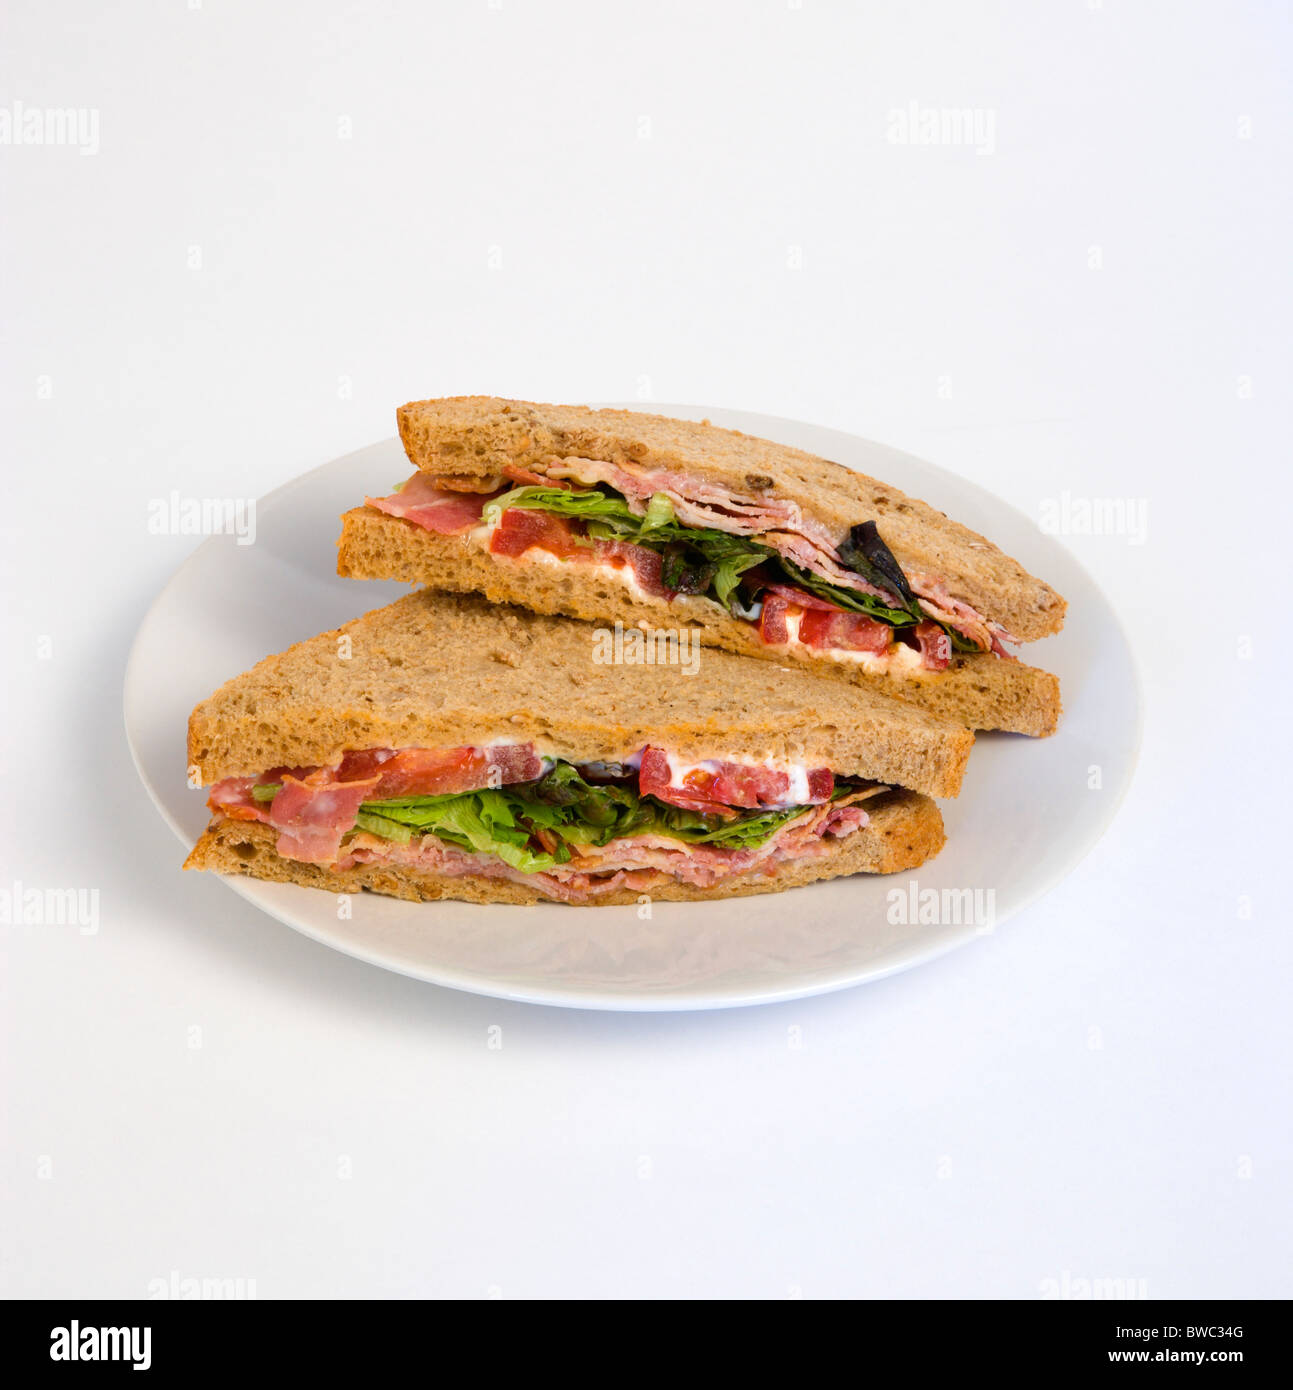 Food, Meal, Snack, Bacon lettuce and tomato BLT brown bread sandwich on a white plate against a white background. Stock Photo